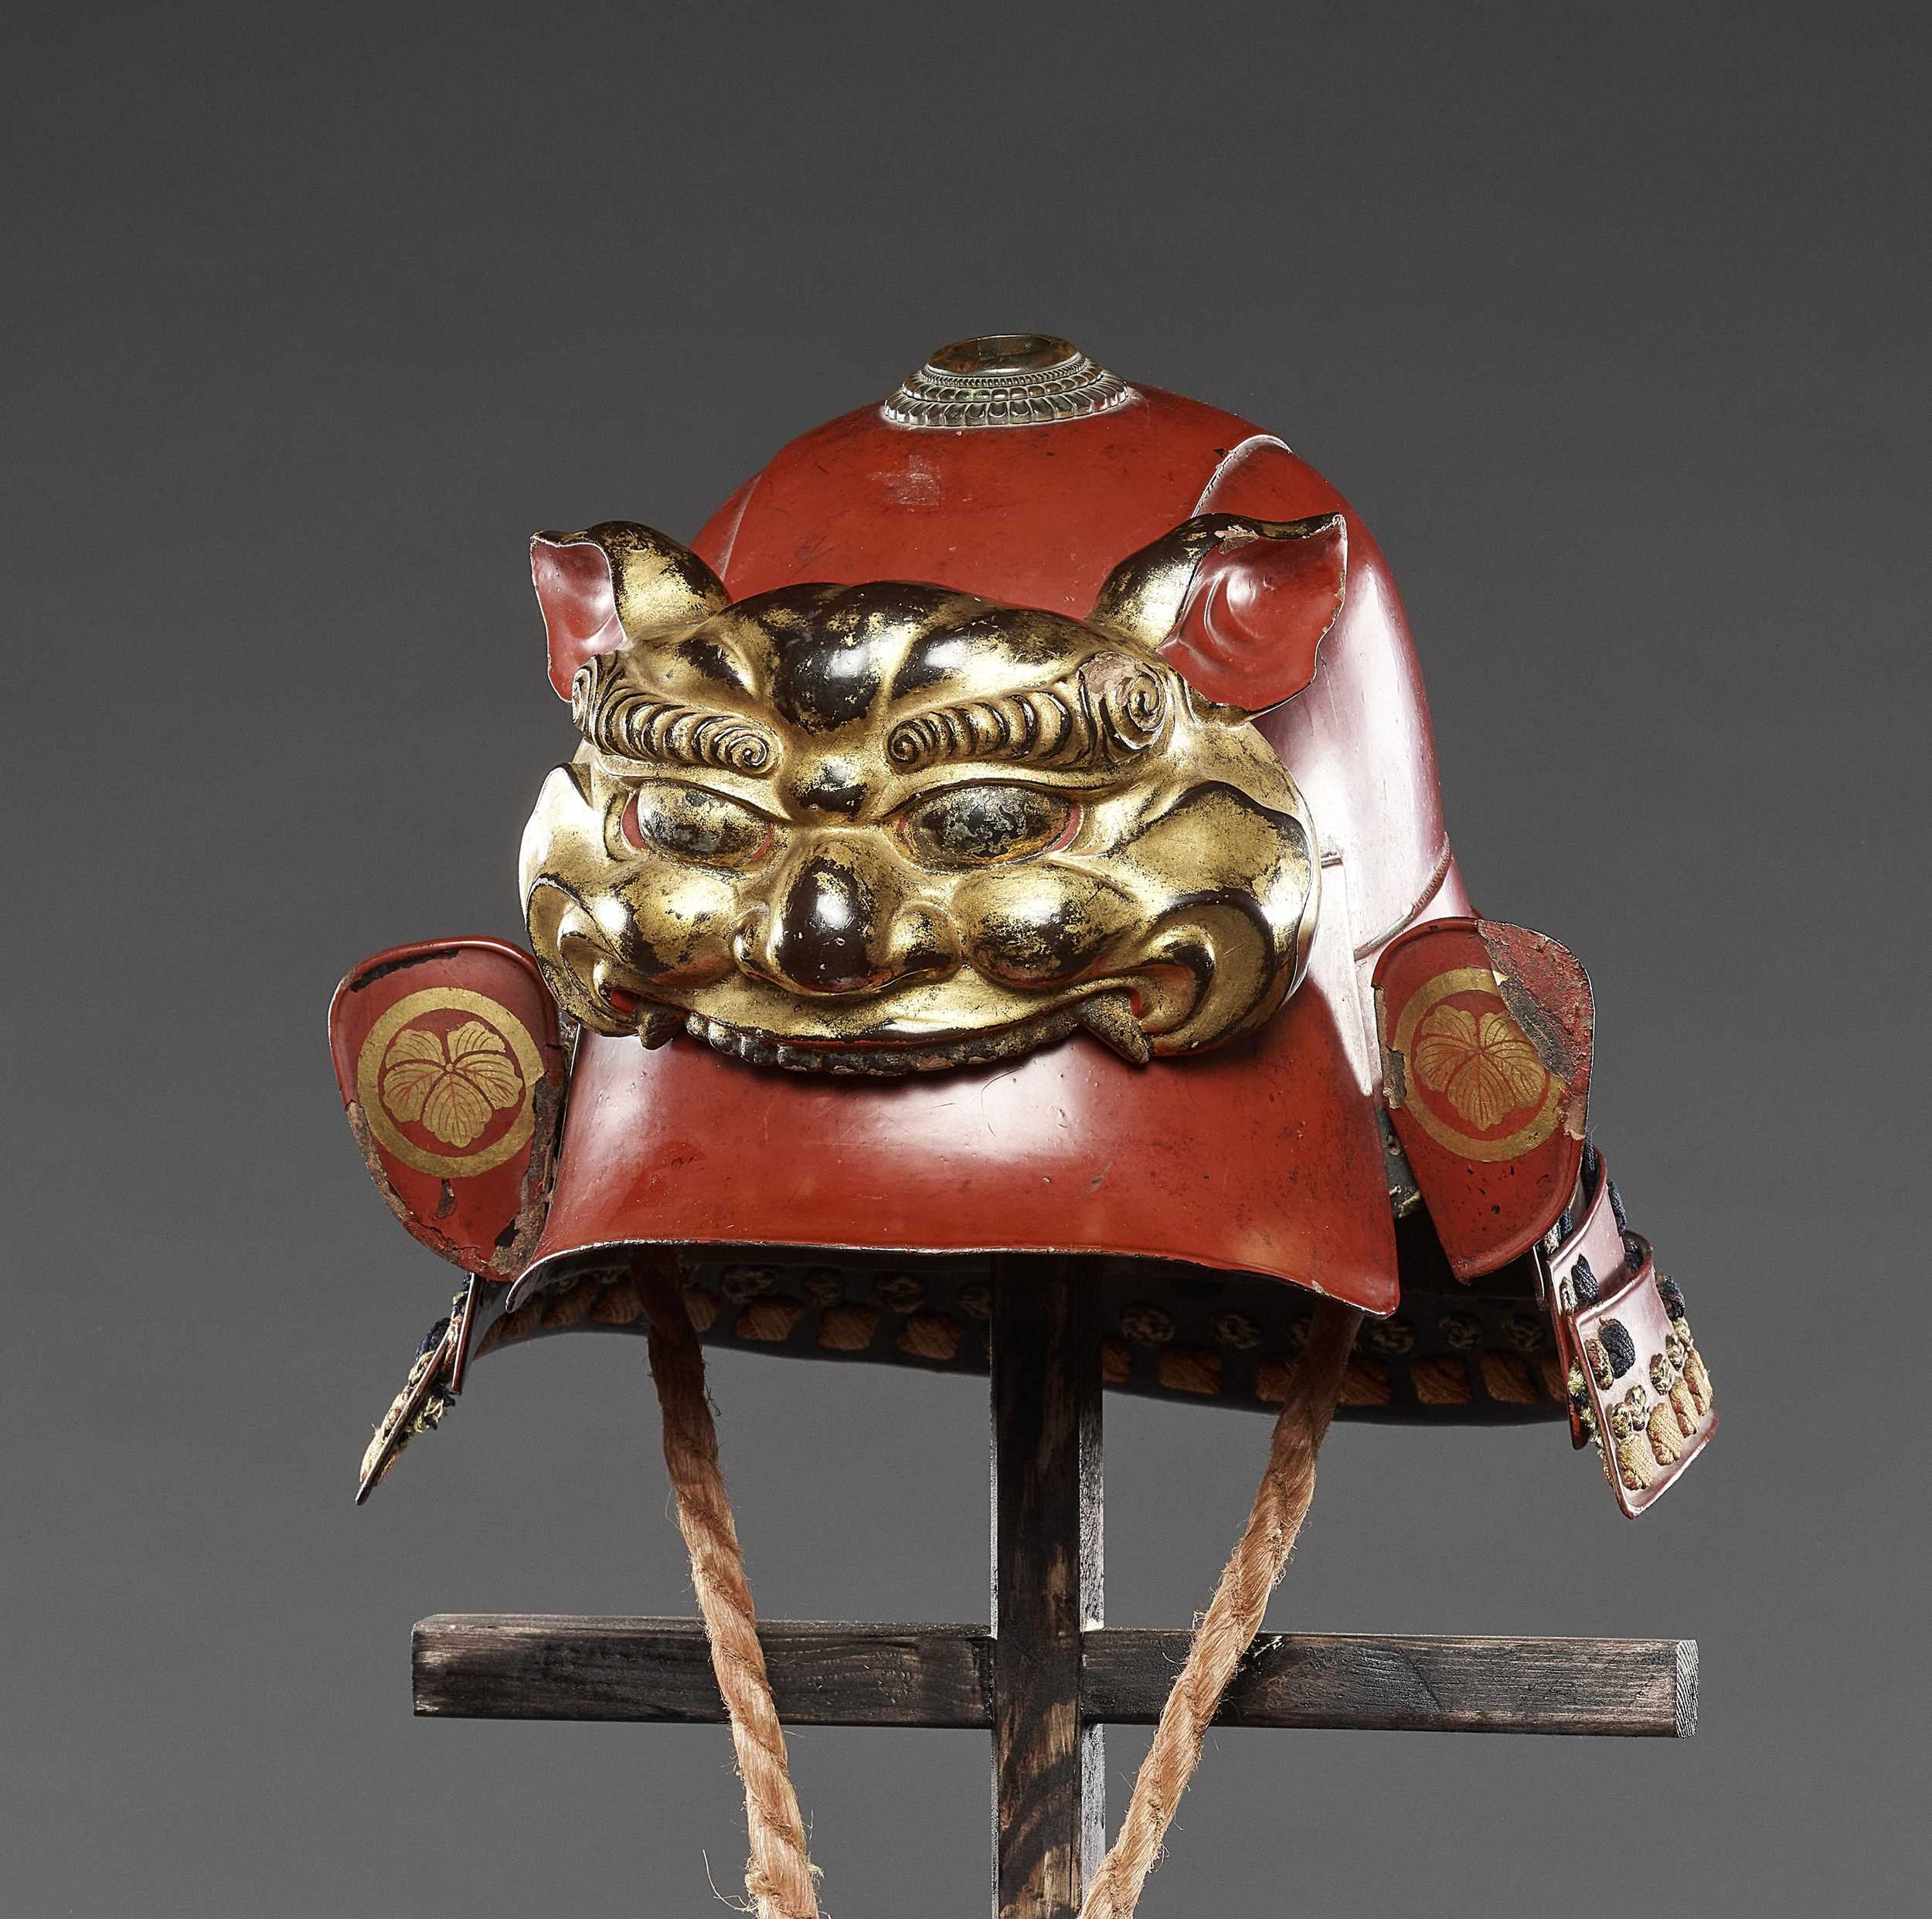 Lot 45 - A RED-LACQUERED ZUNARI KABUTO WITH LION MASK MAEDATE